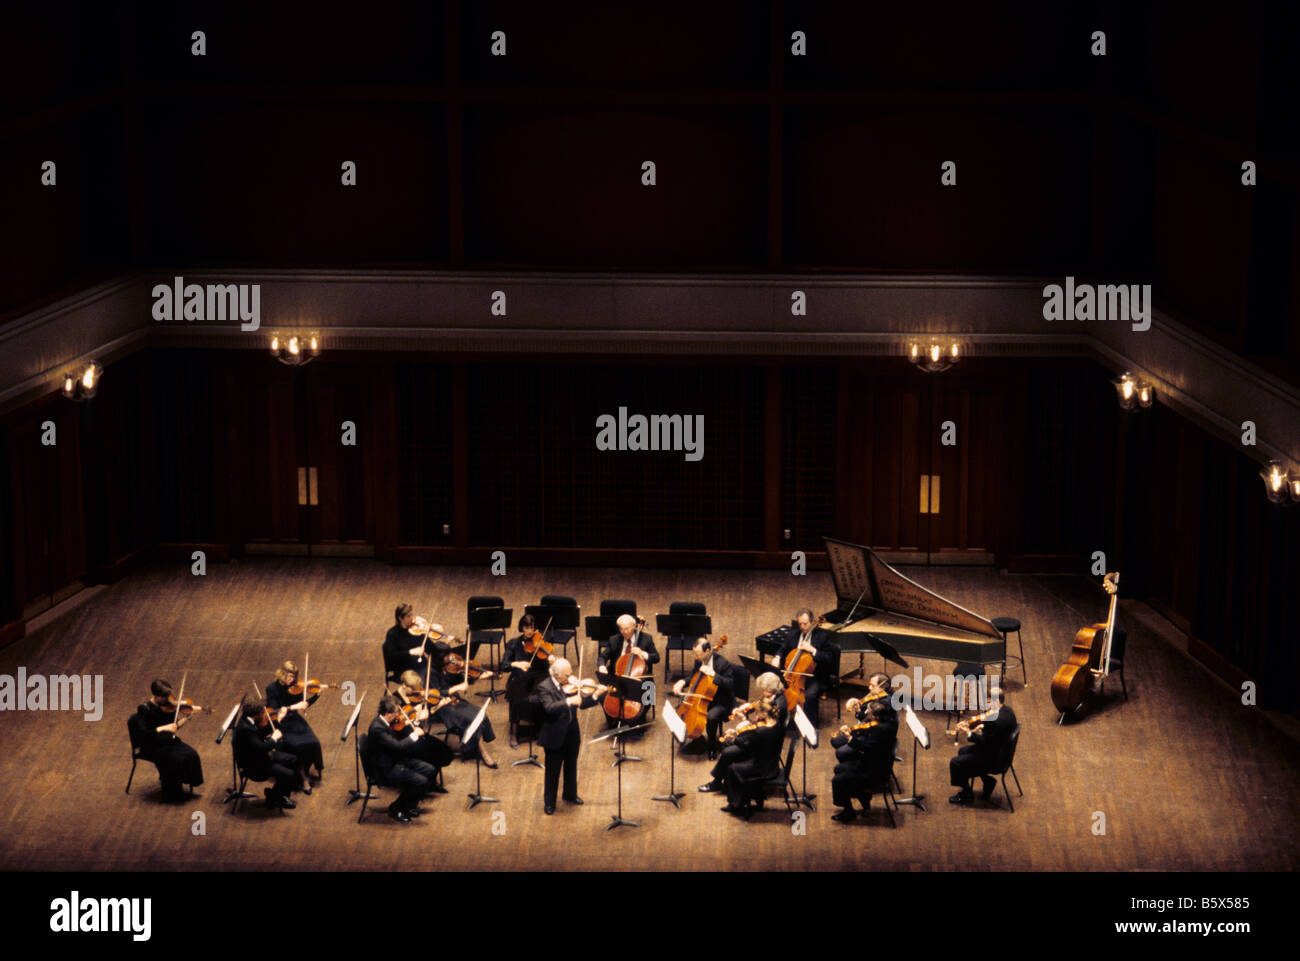 SAINT PAUL CHAMBER ORCHESTRA PERFORMS AT ORDWAY CENTER FOR THE PERFORMING ARTS IN ST. PAUL, MINNESOTA. Stock Photo